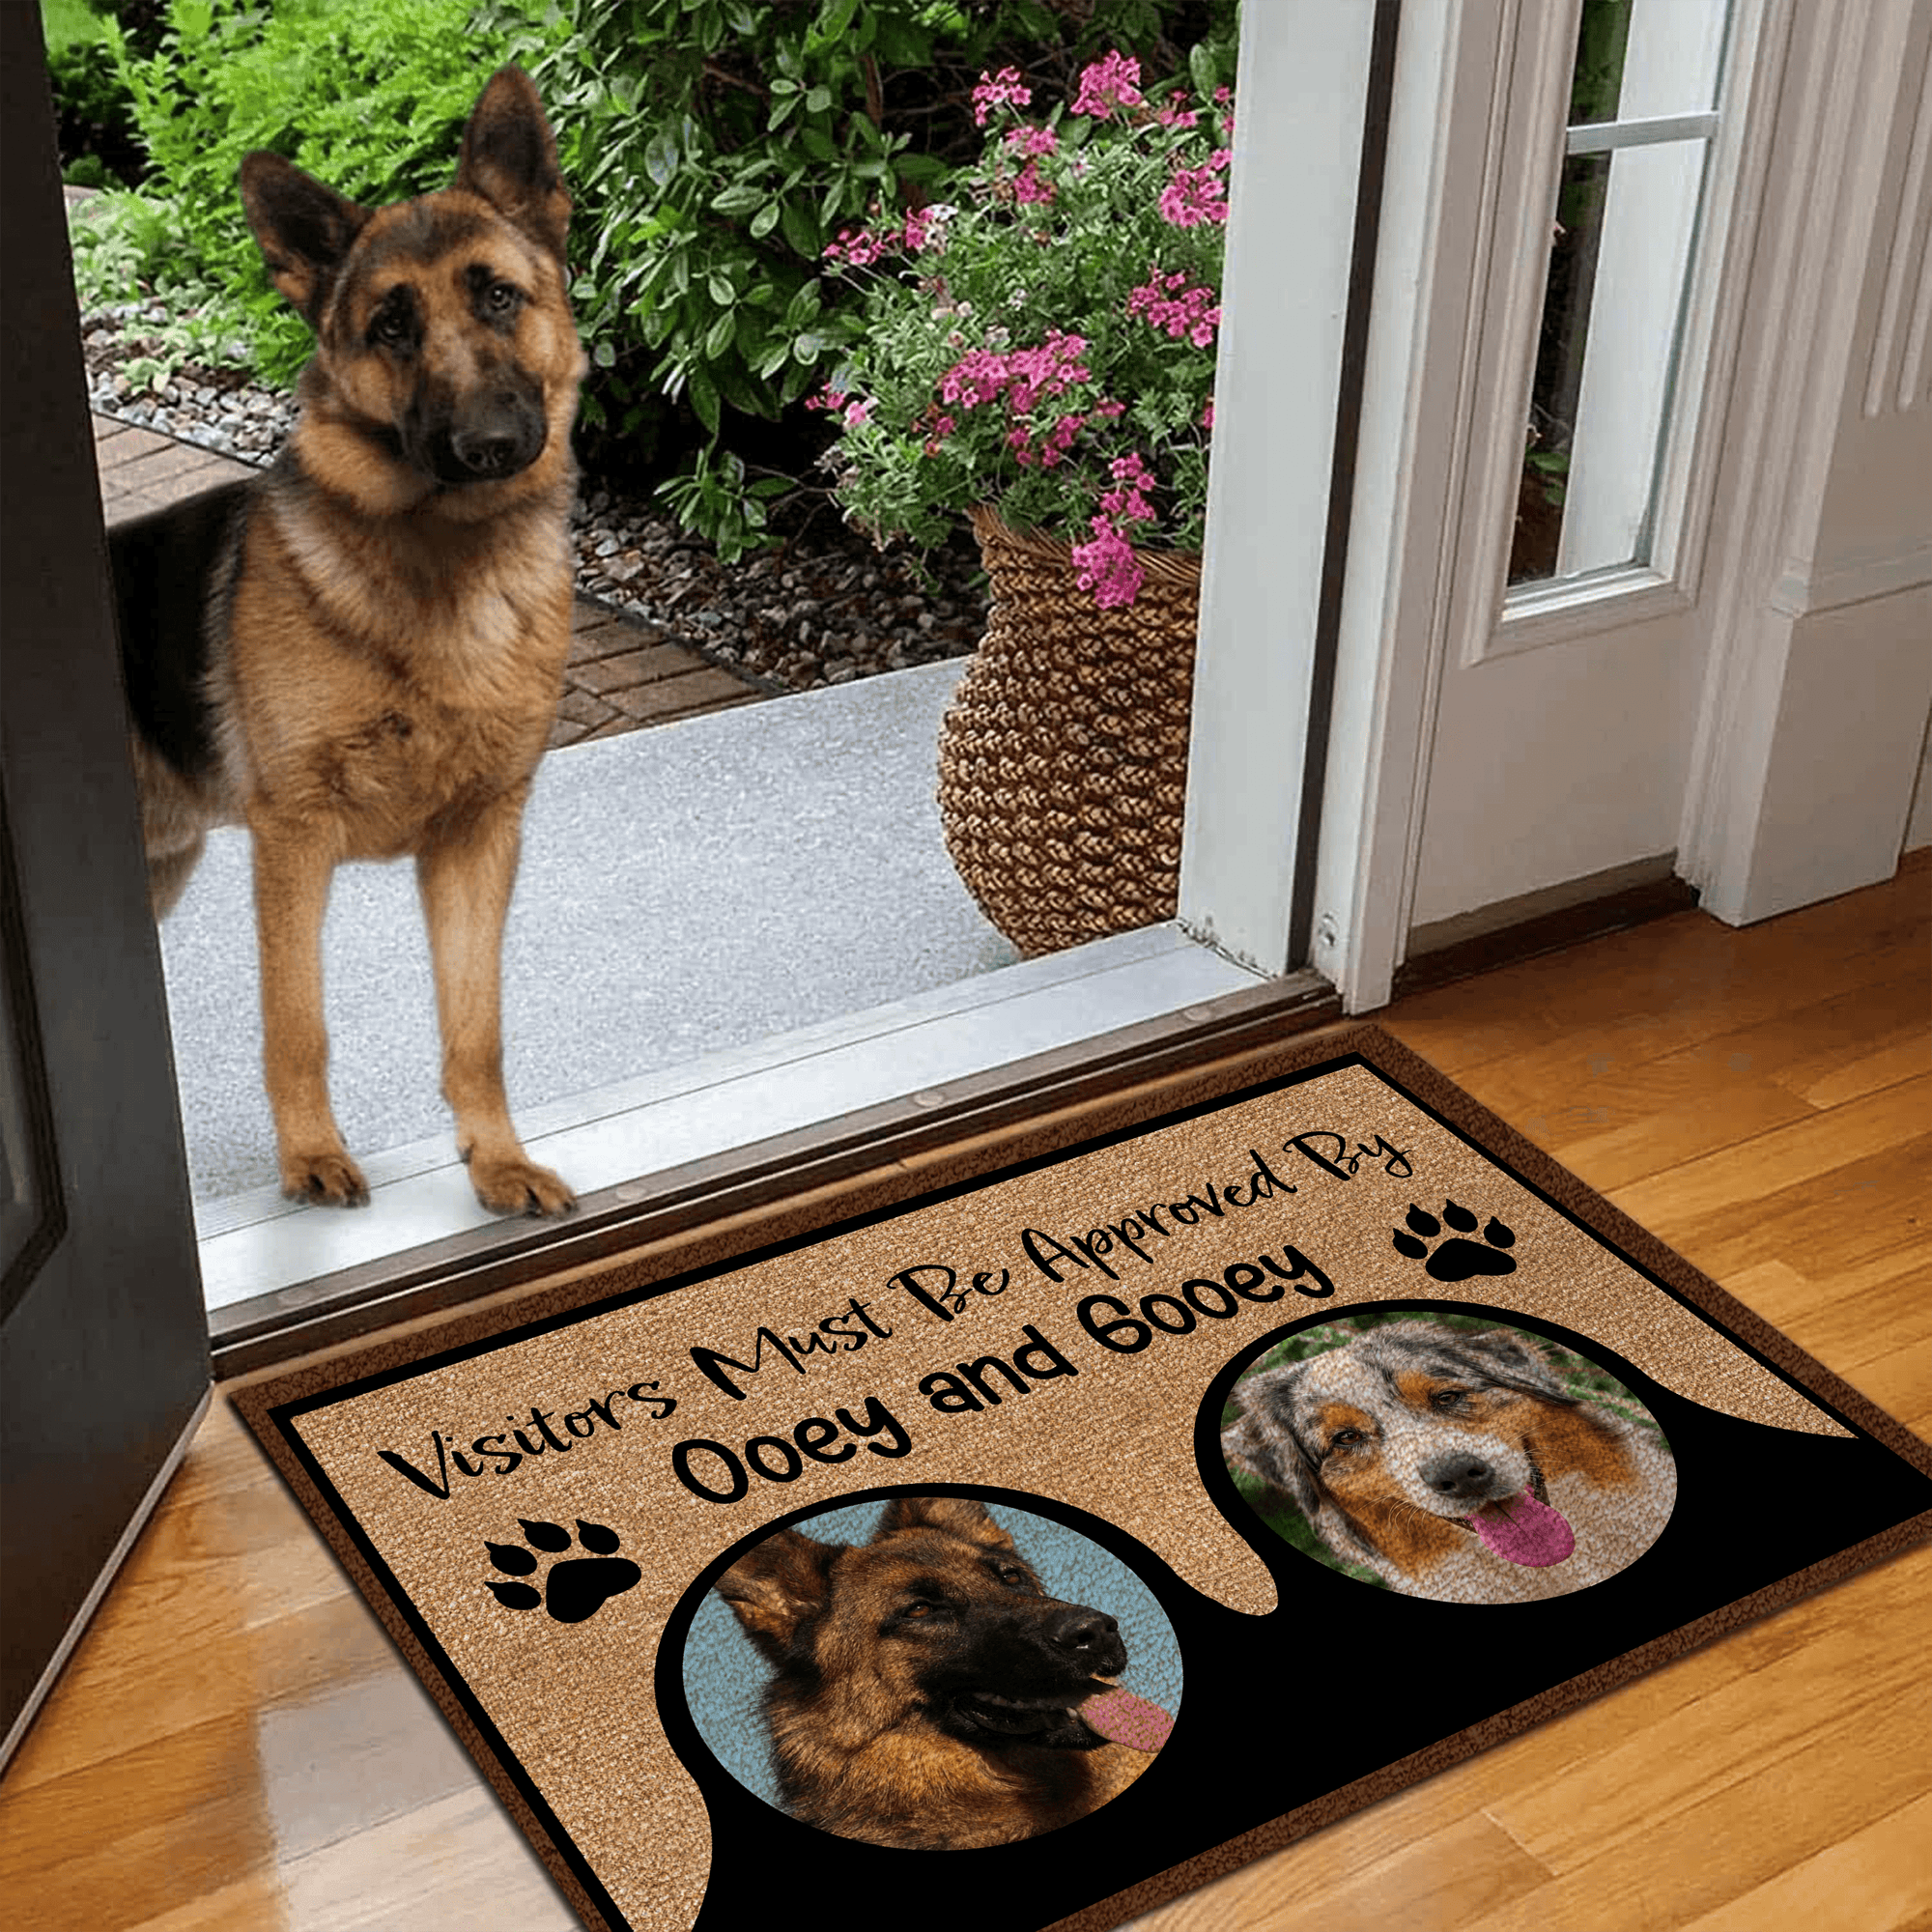 [Photo Inserted] Visitors Must Be Approved By My Dogs - Personalized Doormat - Birthday, Housewarming, Funny Gift for Homeowners, Friends, Dog Mom, Dog Dad, Dog Lovers, Pet Gifts for Him, Her - Suzitee Store